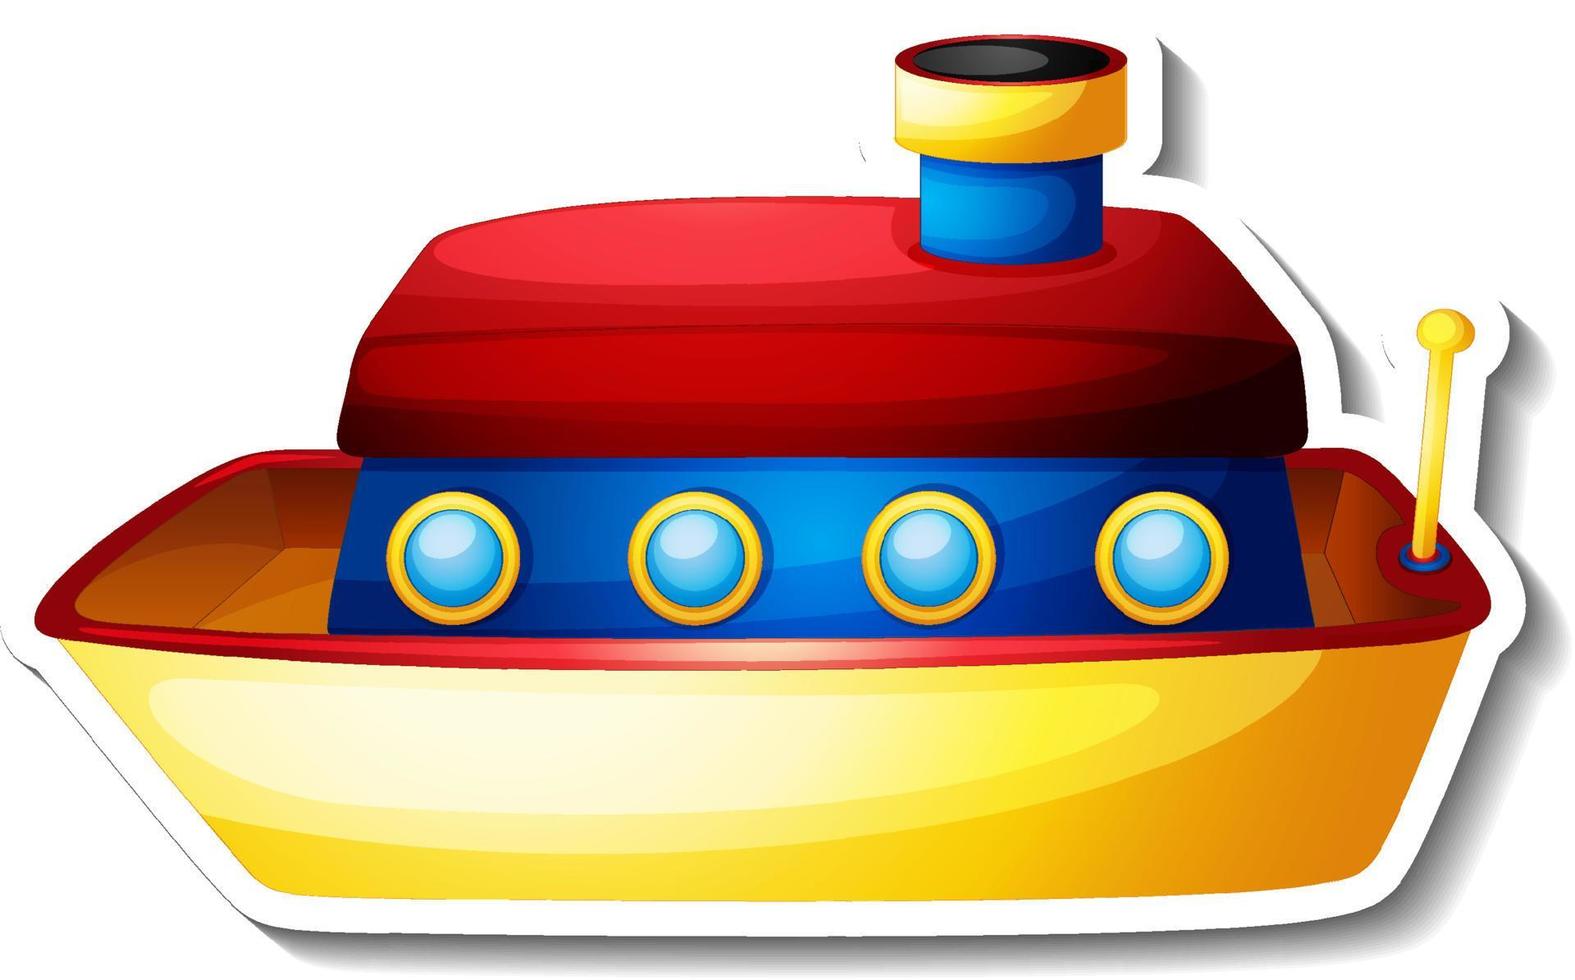 Boat toy cartoon sticker on white background vector